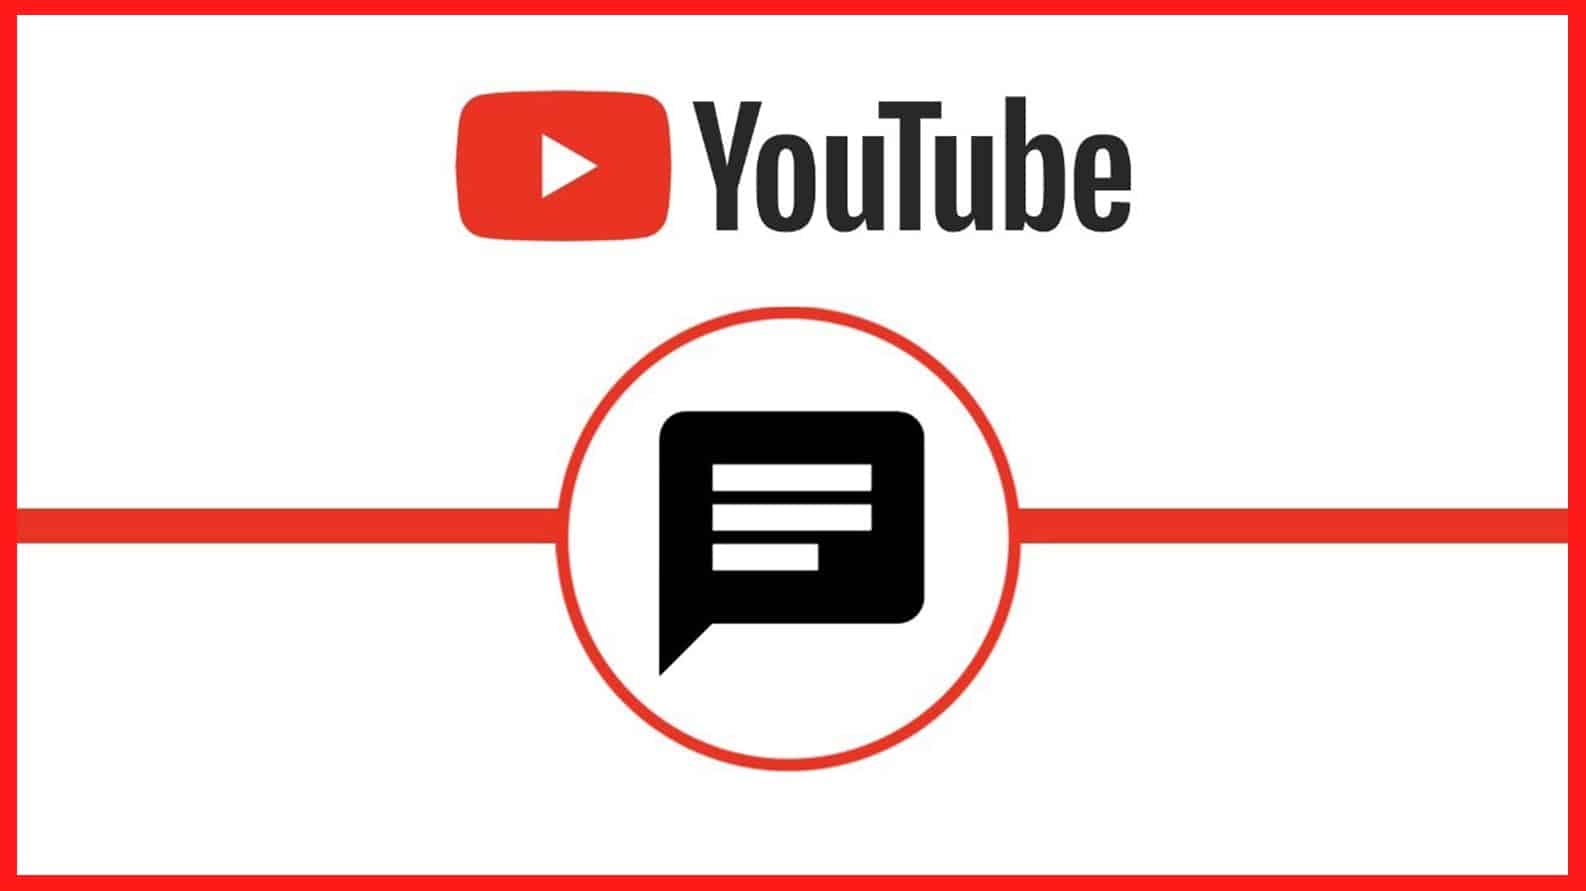 YouTube chat graphic